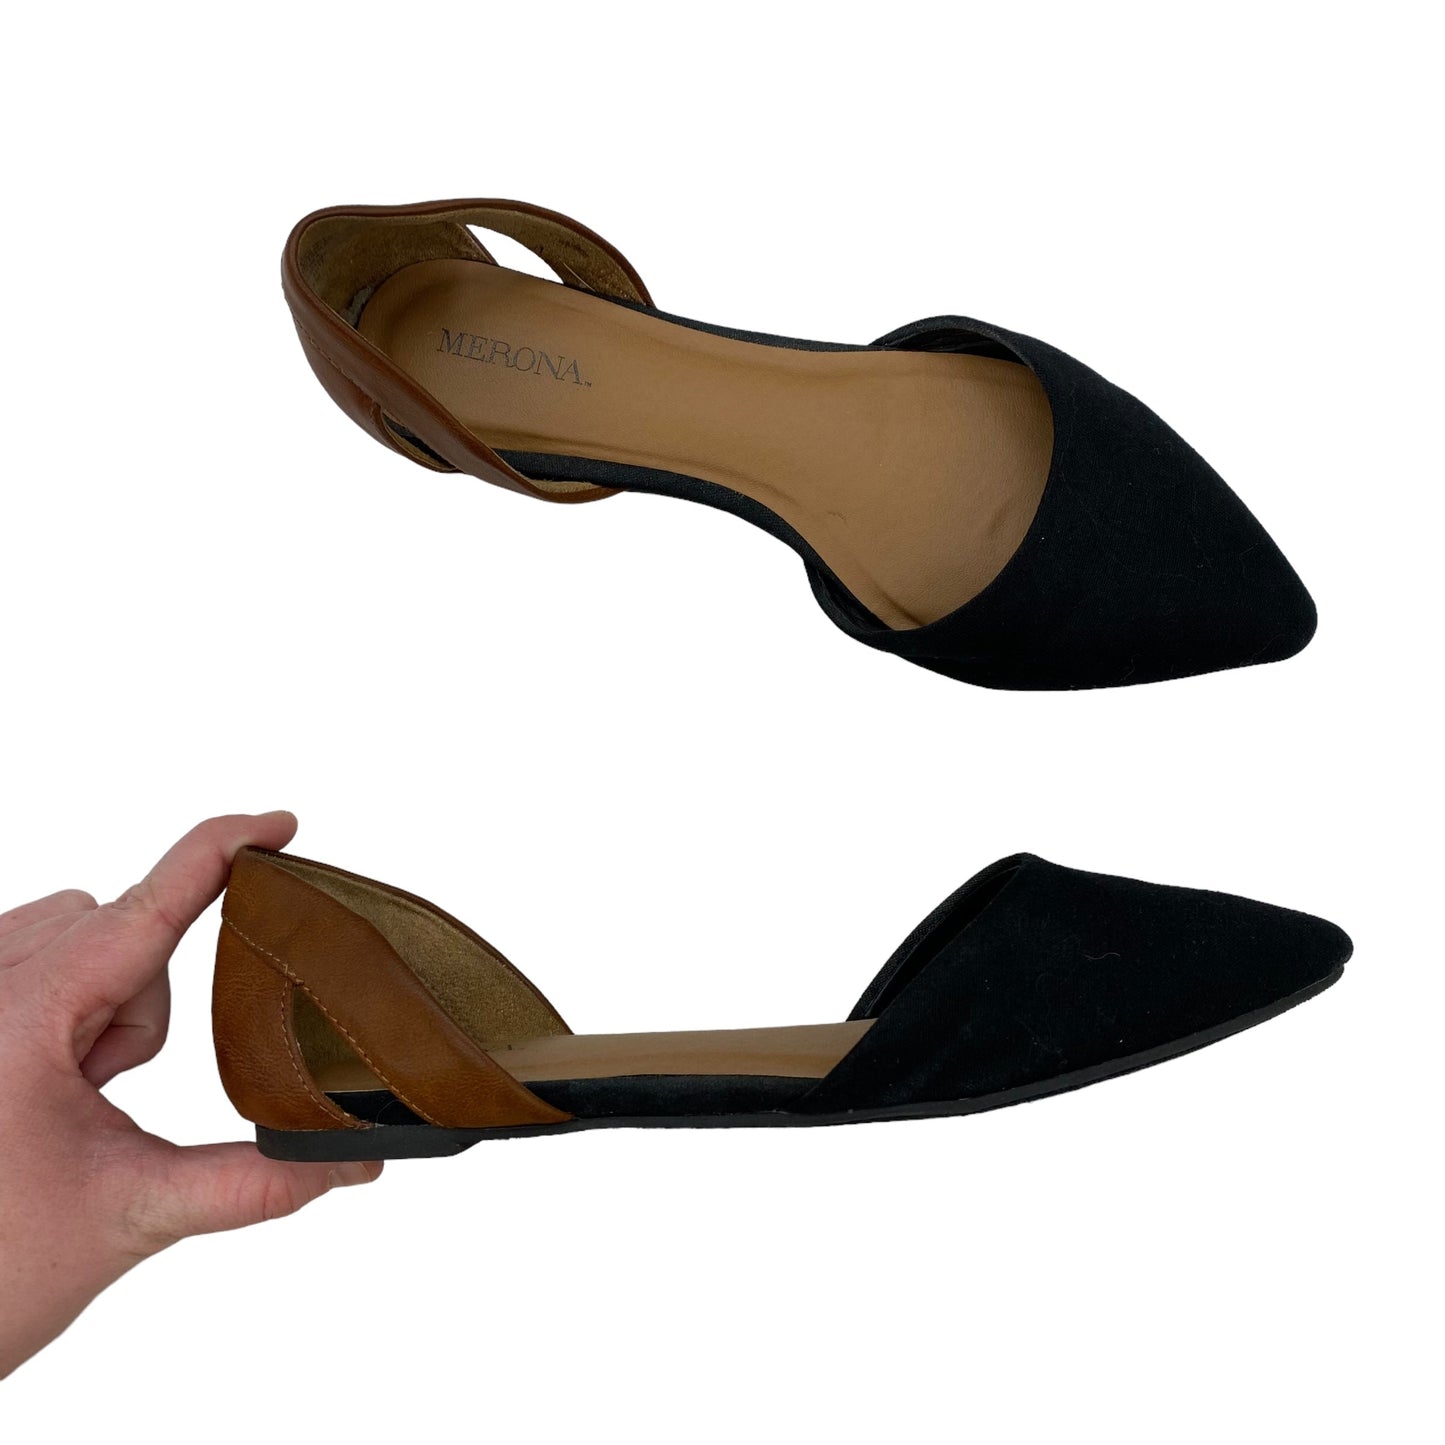 BLACK & BROWN SANDALS FLATS by MERONA Size:7.5